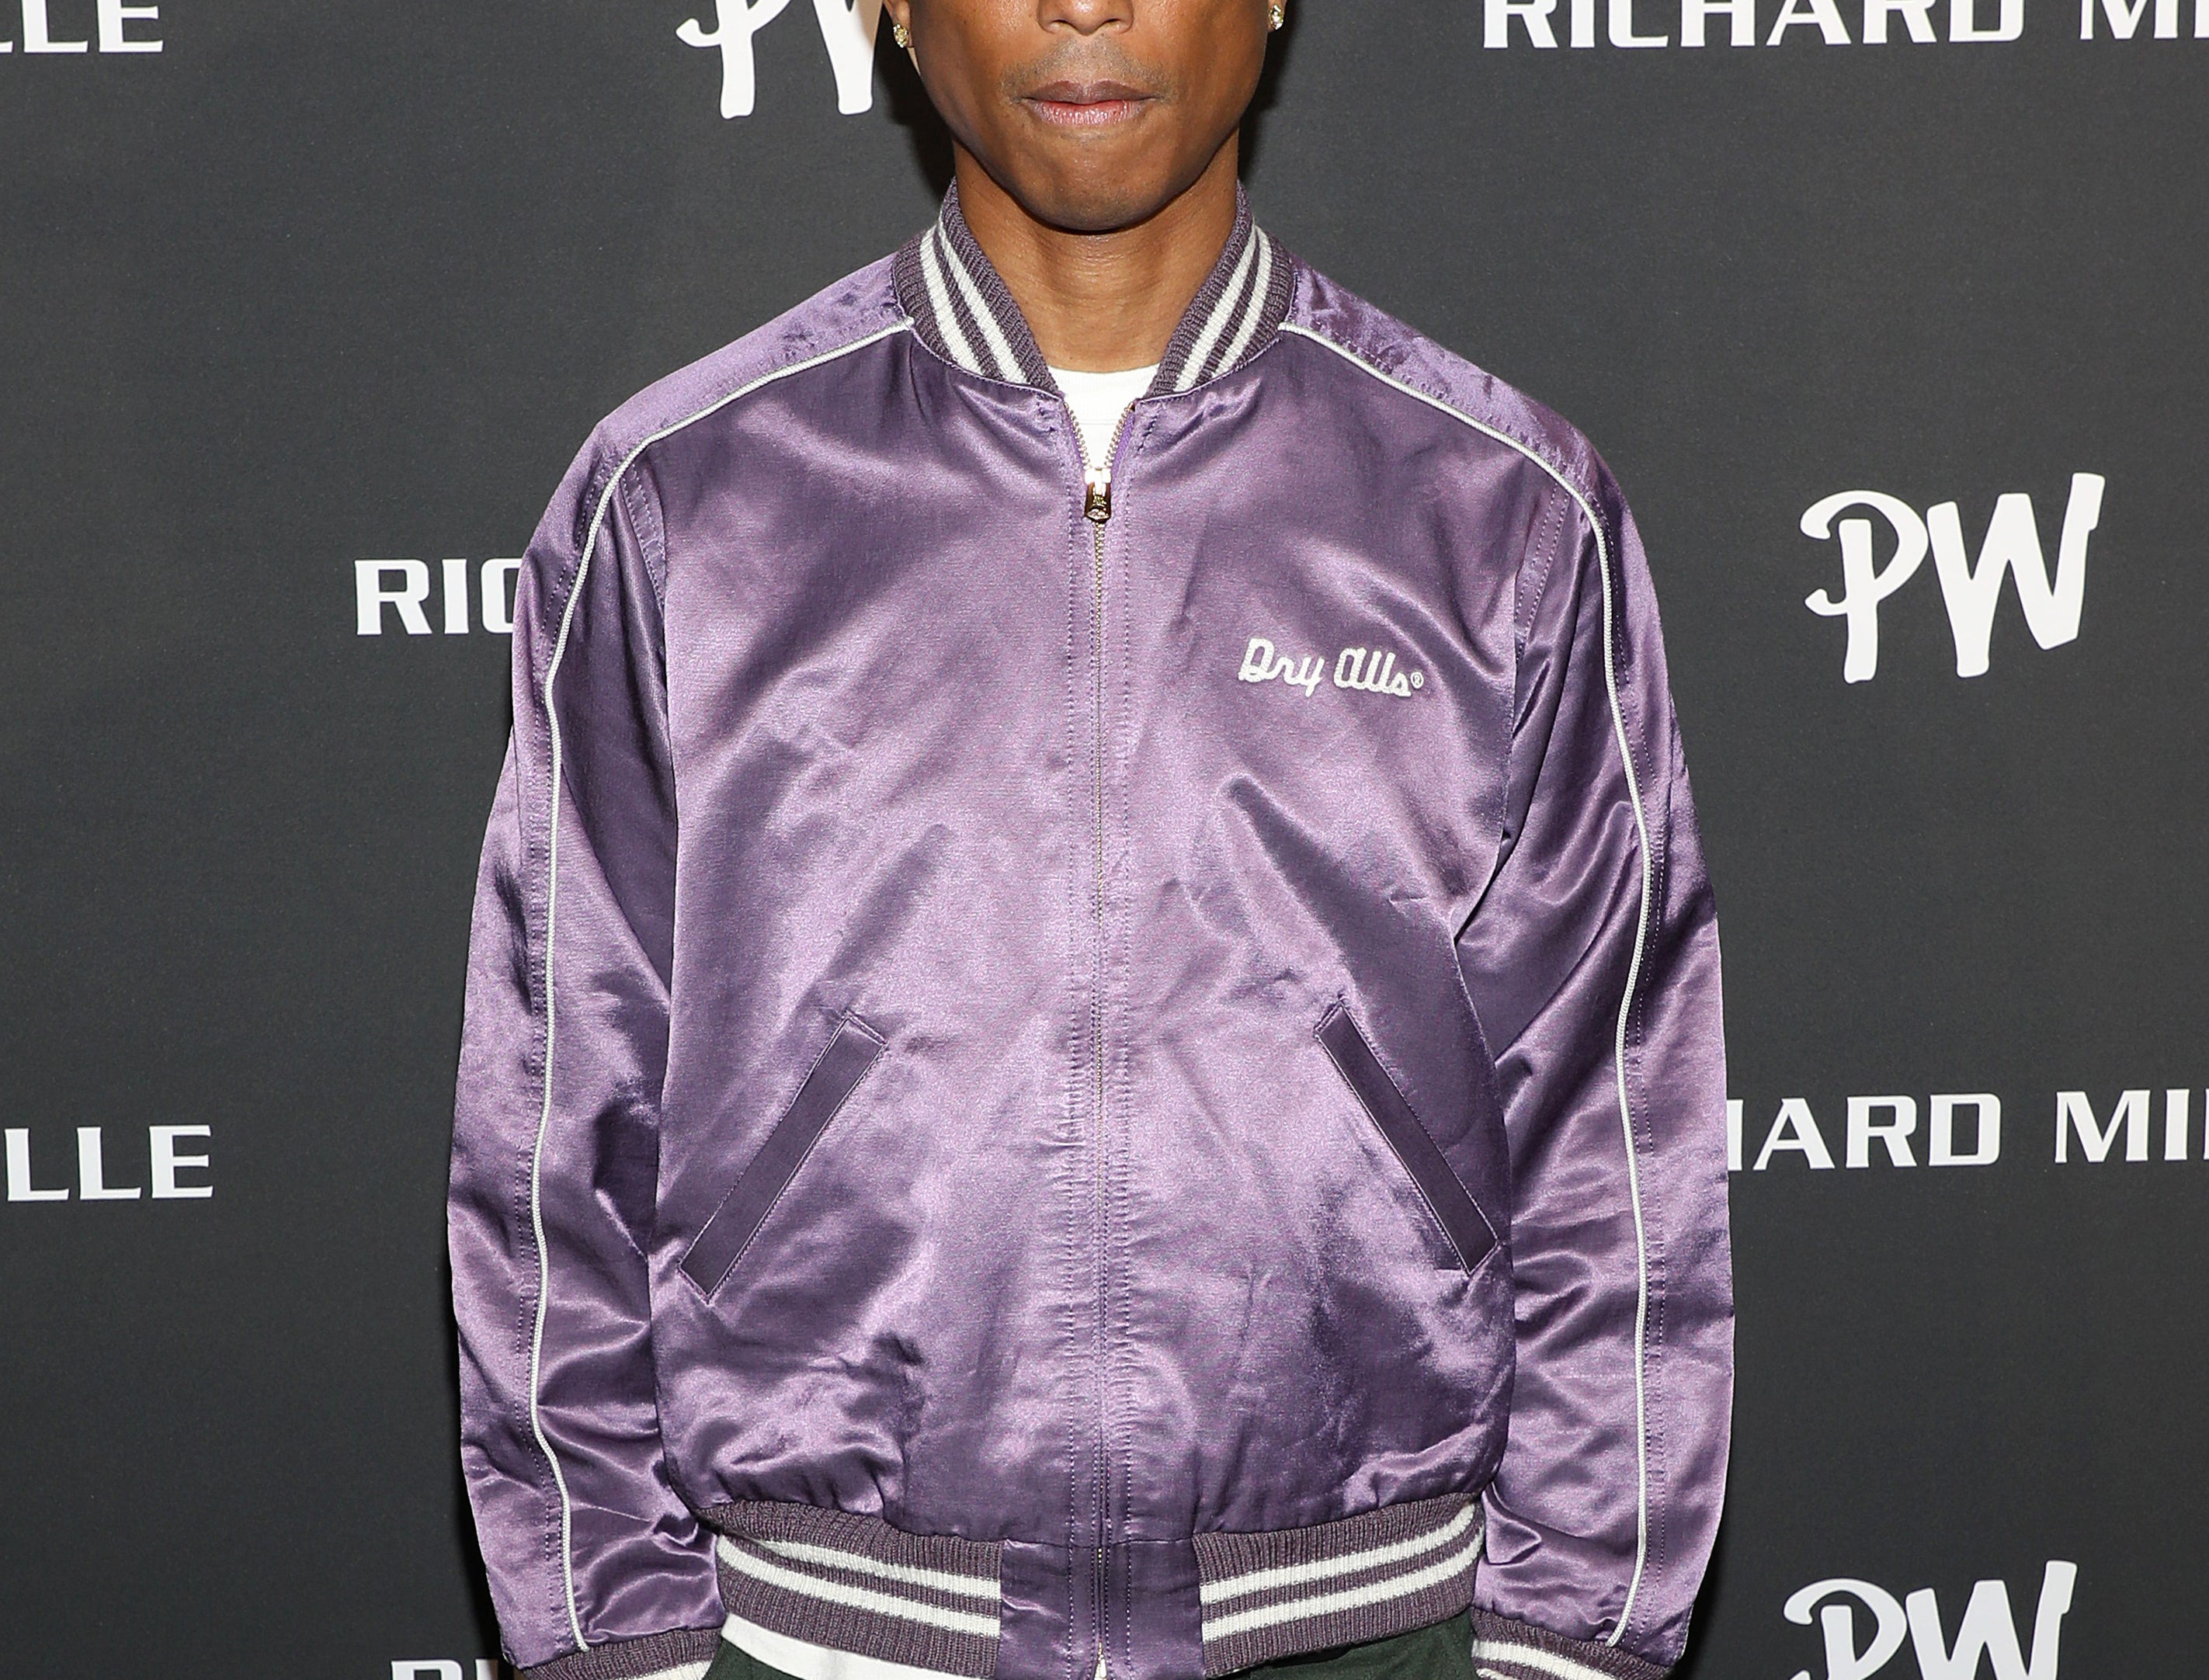 Pharrell on the red carpet in a satiny Dry Allls bomber jacket